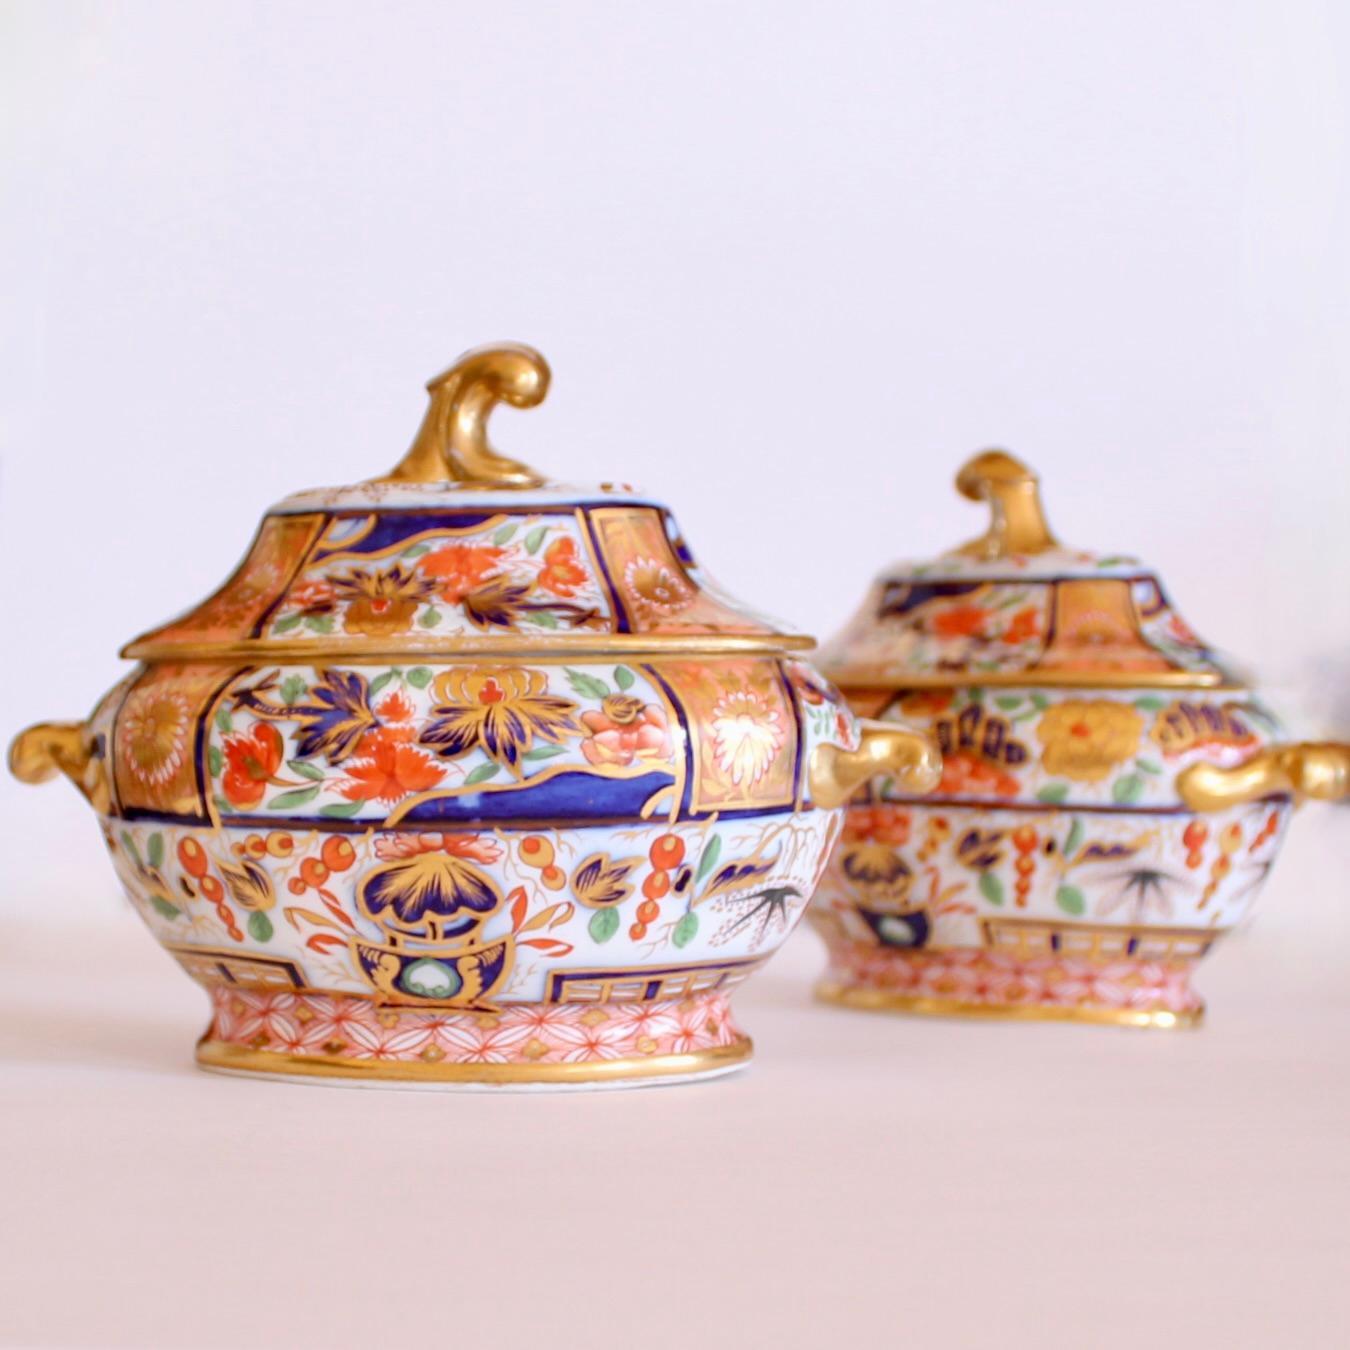 Of the highest quality, possibly Chamberlains Worcester, these early sauce tureens feature great details, extreme refinement and an unusually light palette with sections of salmon colored ground with gilt decoration as well as fresh green tree and